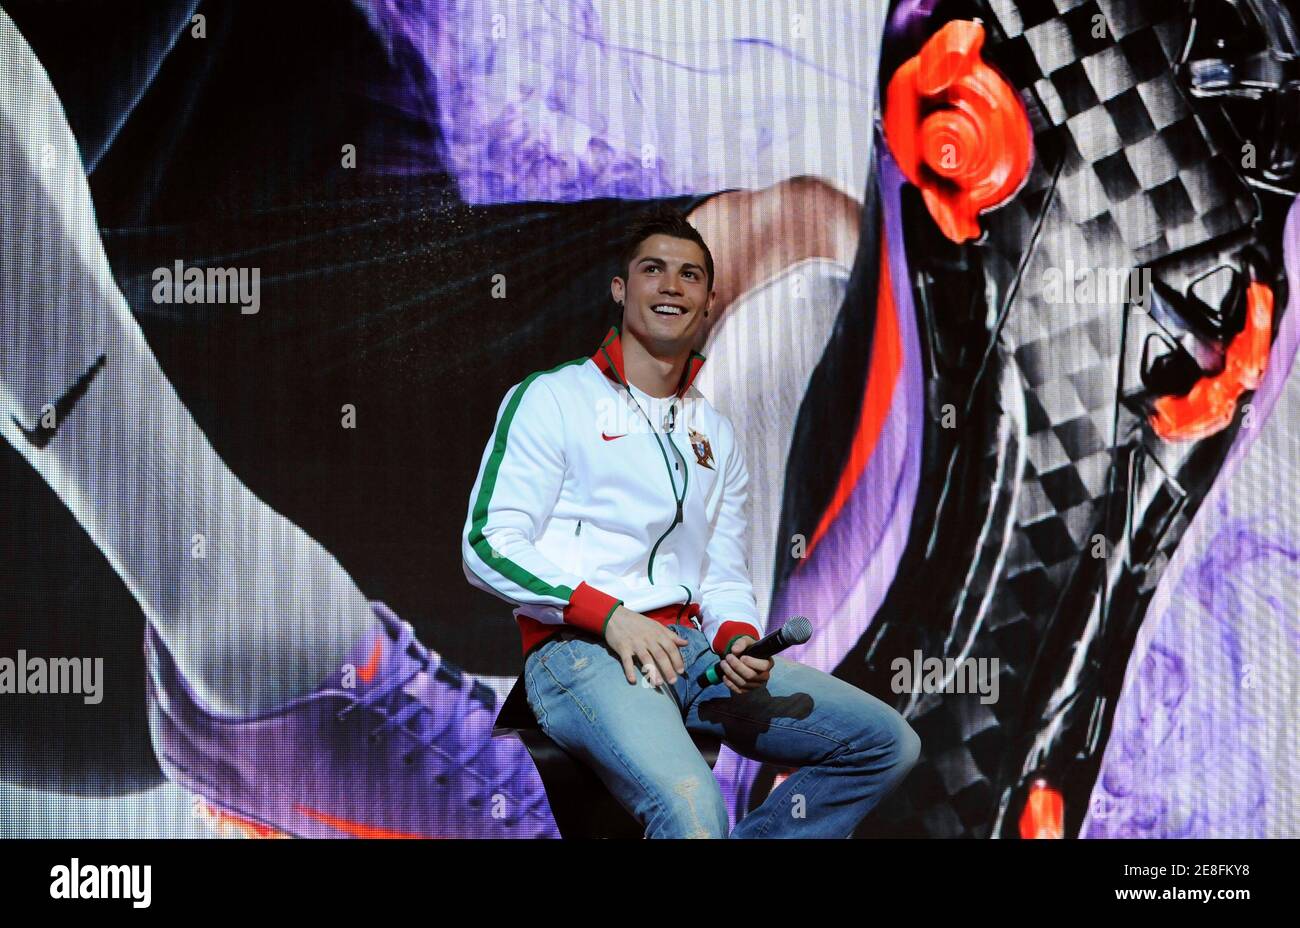 repetir Ordenador portátil desayuno Real Madrid's Portuguese soccer player Cristiano Ronaldo smiles during the  launch of the new Nike Mercurial Vapor Superfly II soccer boot at an event  in London February 24, 2010. REUTERS/Jas Lehal (BRITAIN -